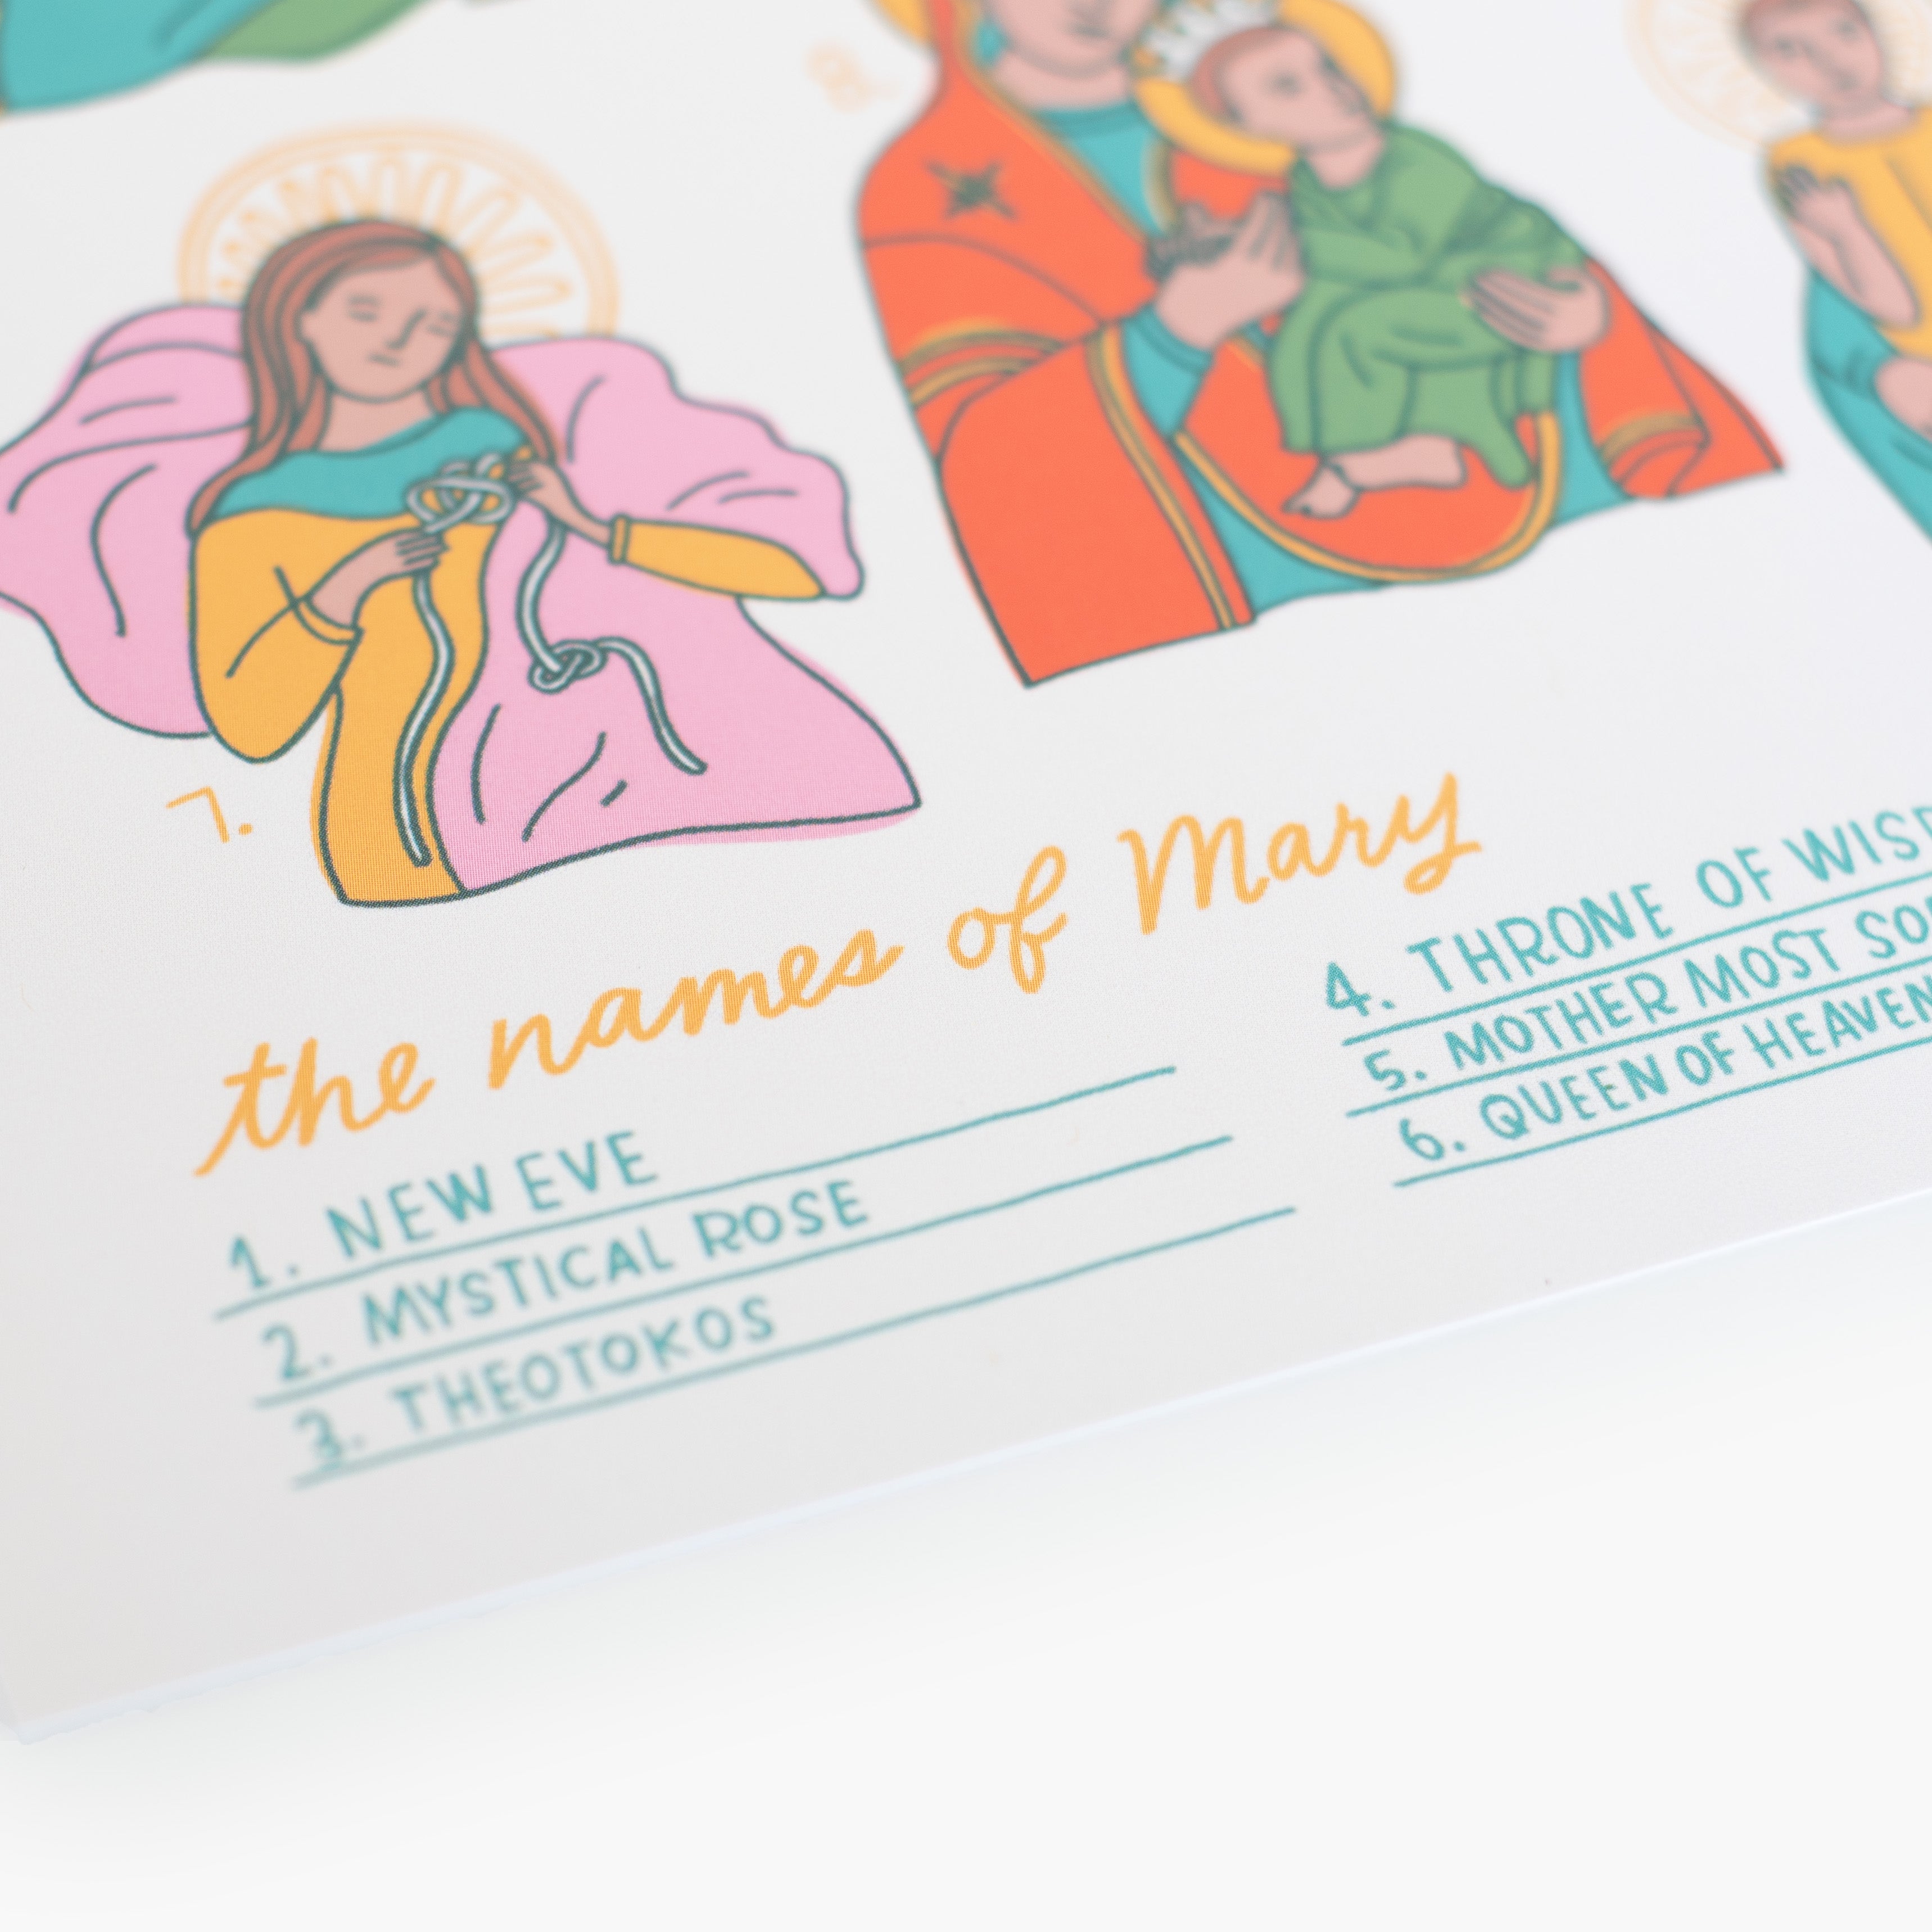 The Names of Mary Art Print